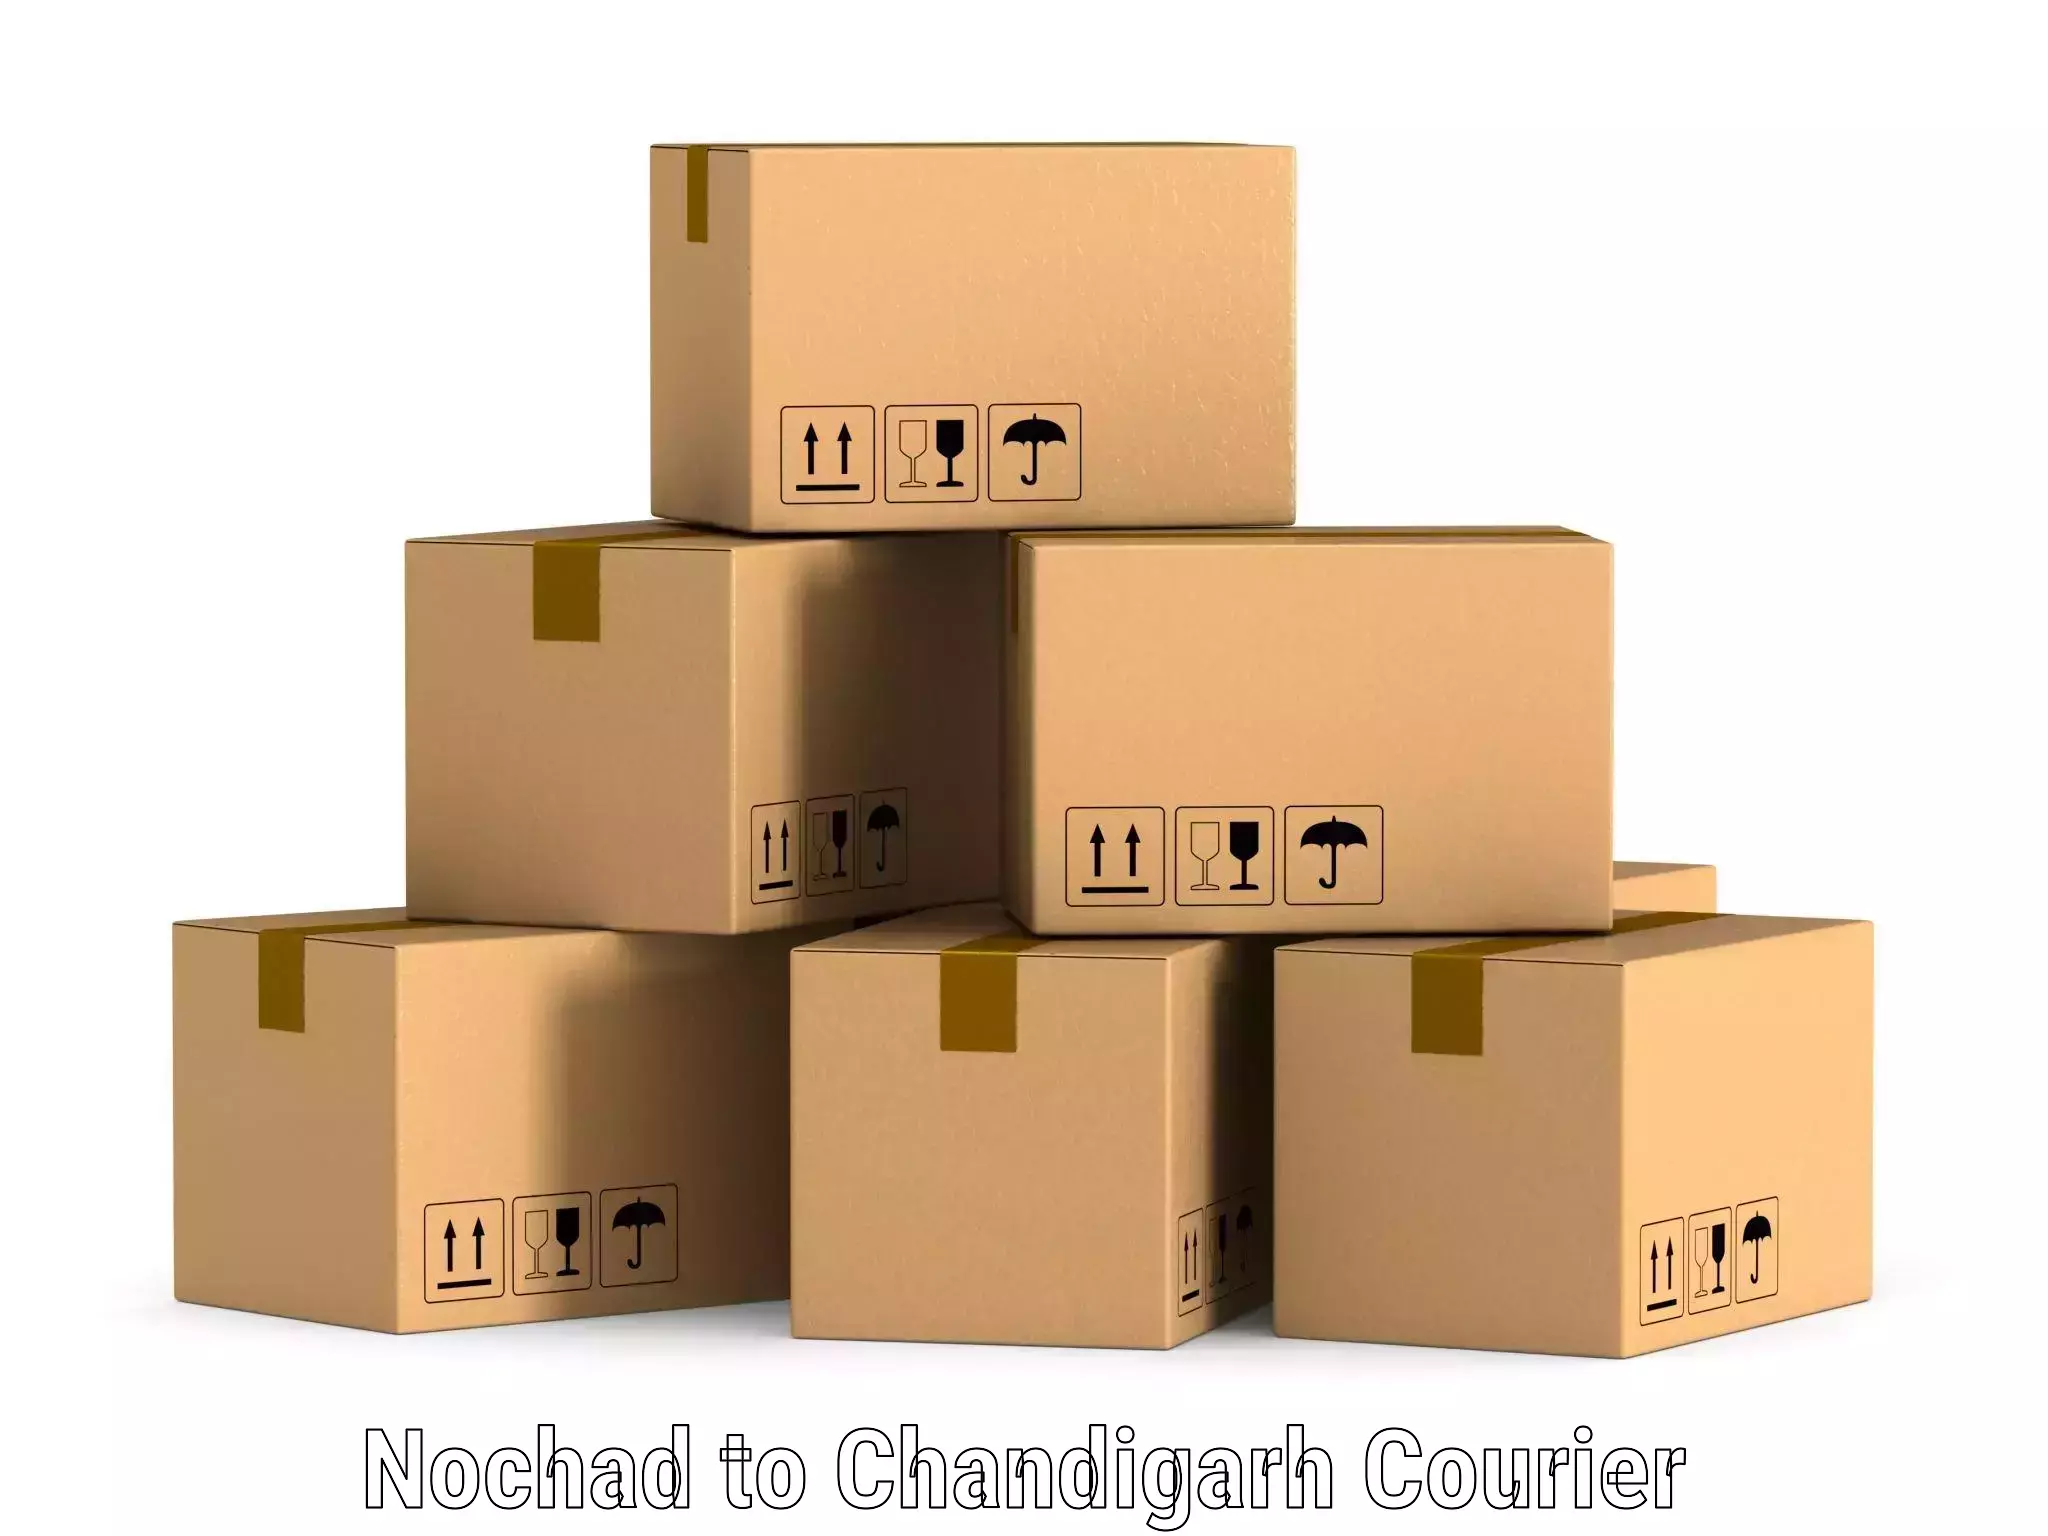 State-of-the-art courier technology Nochad to Chandigarh